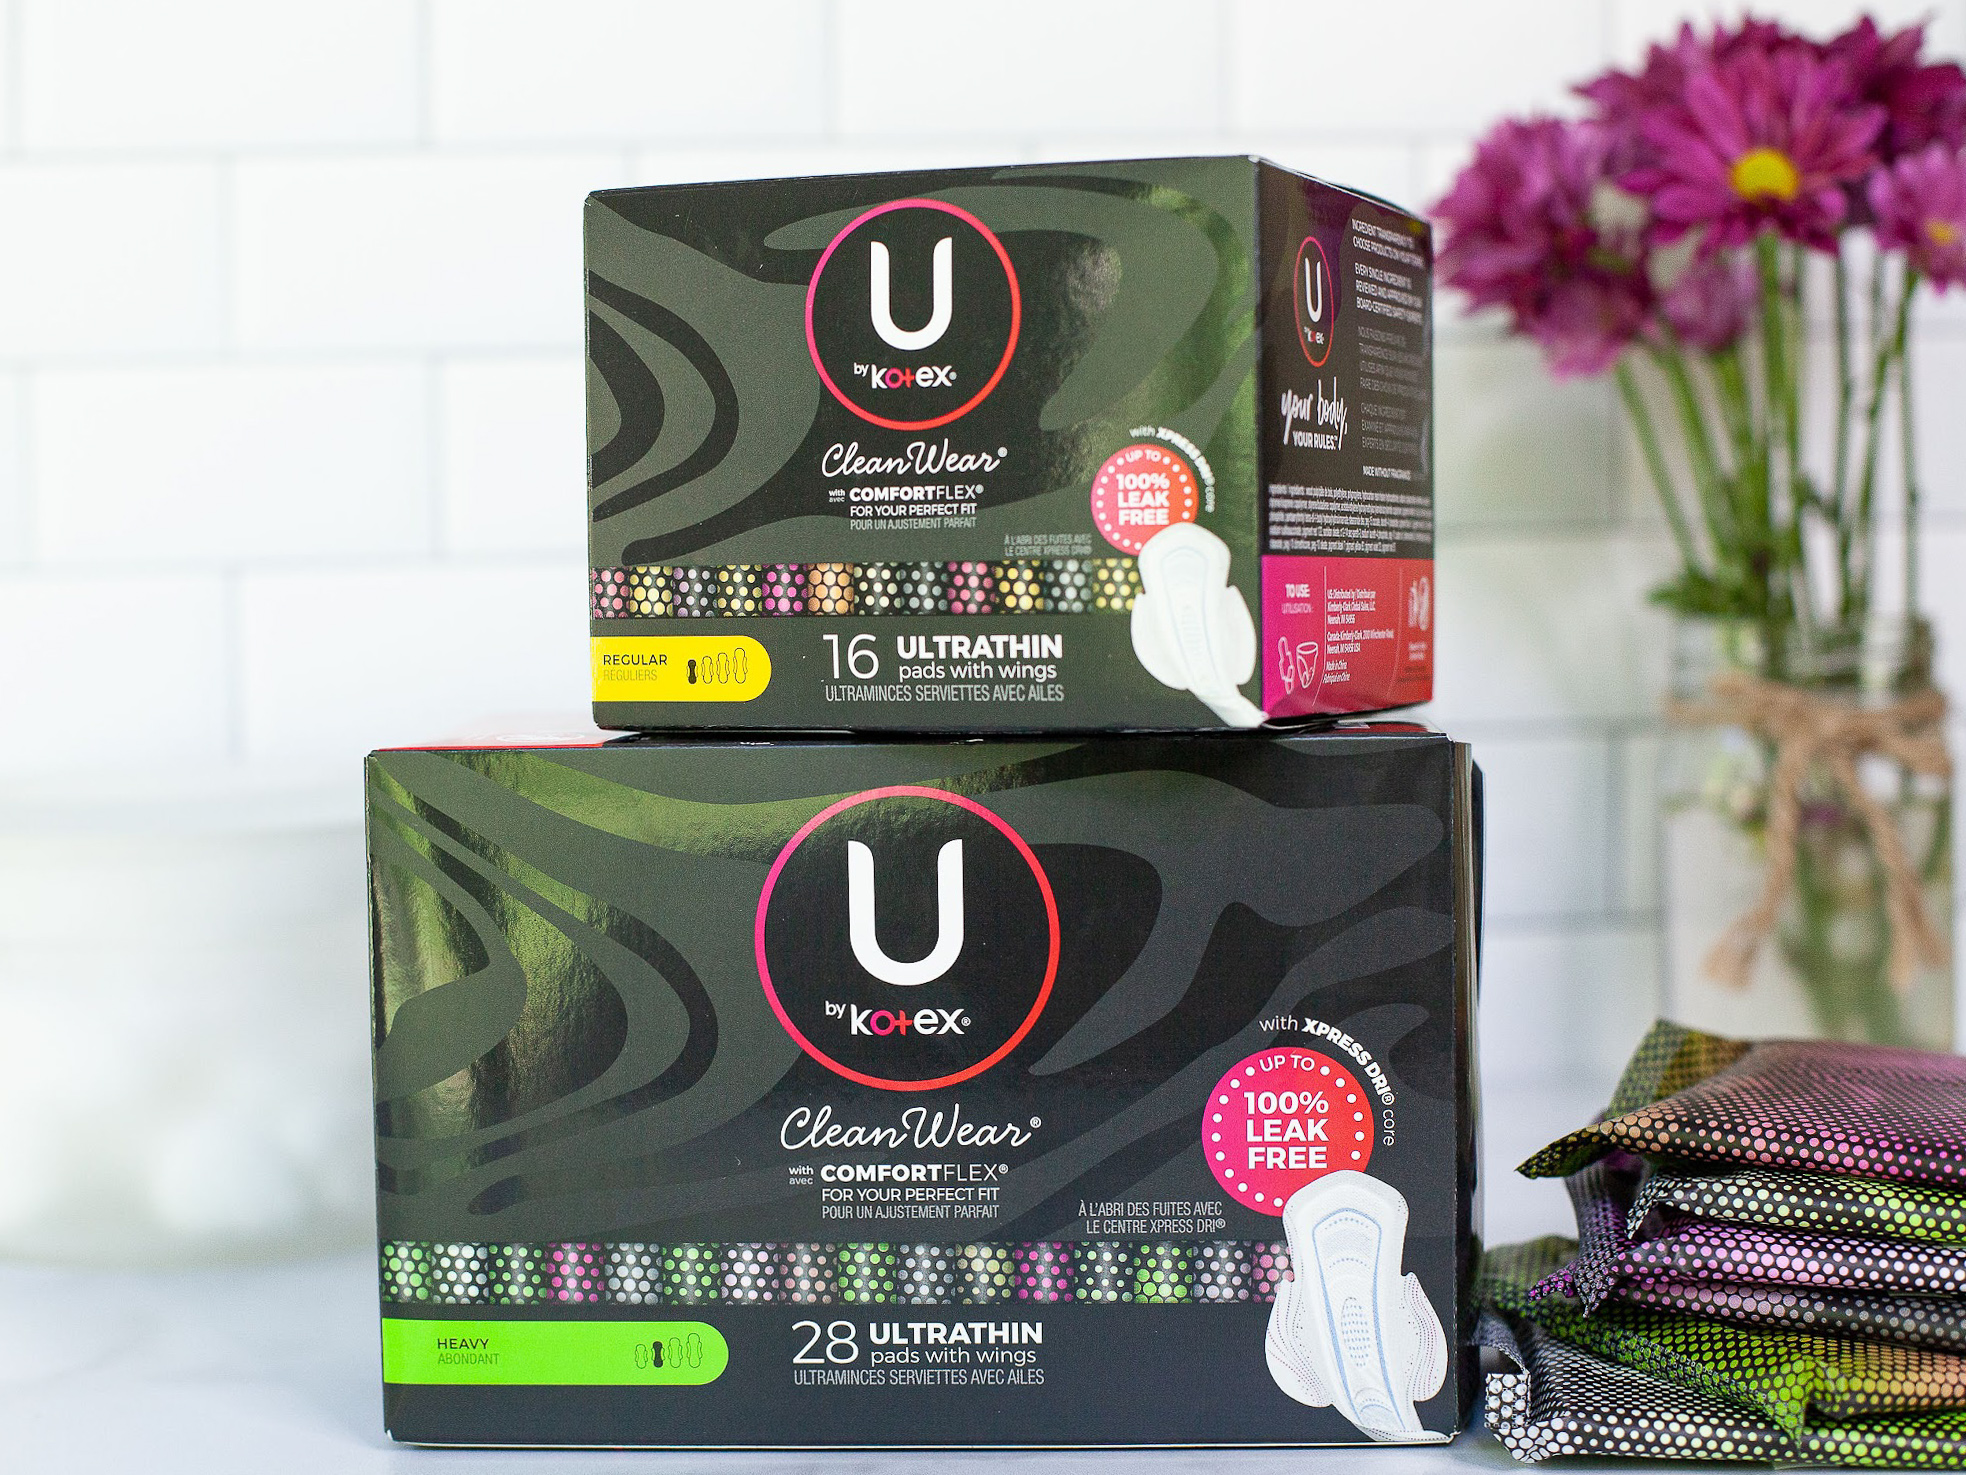 Grab U By Kotex Pads And Liners For As Low As $1.59 At Kroger